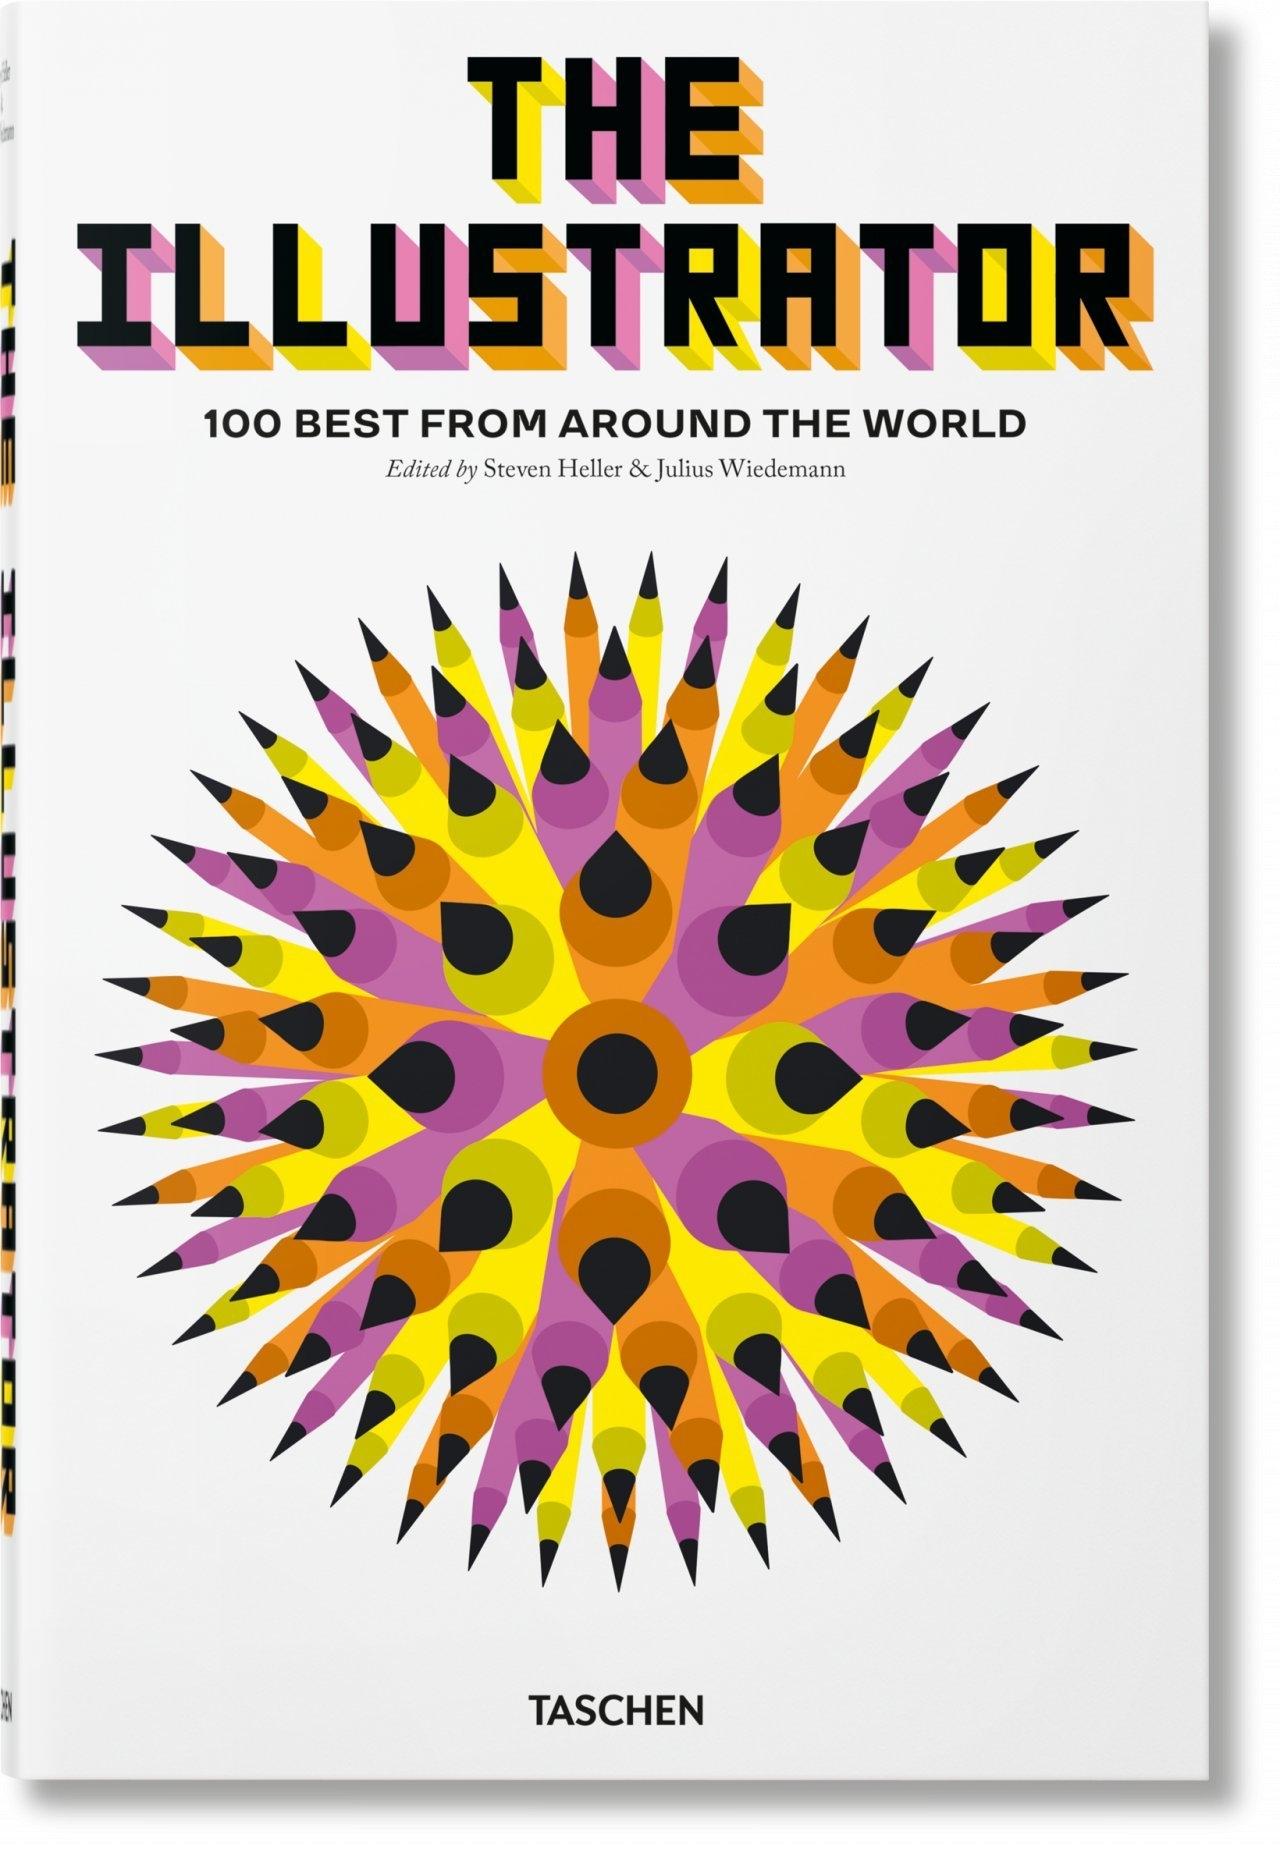 ILLUSTRATOR. 100 BEST FROM AROUND THE WORLD, THE